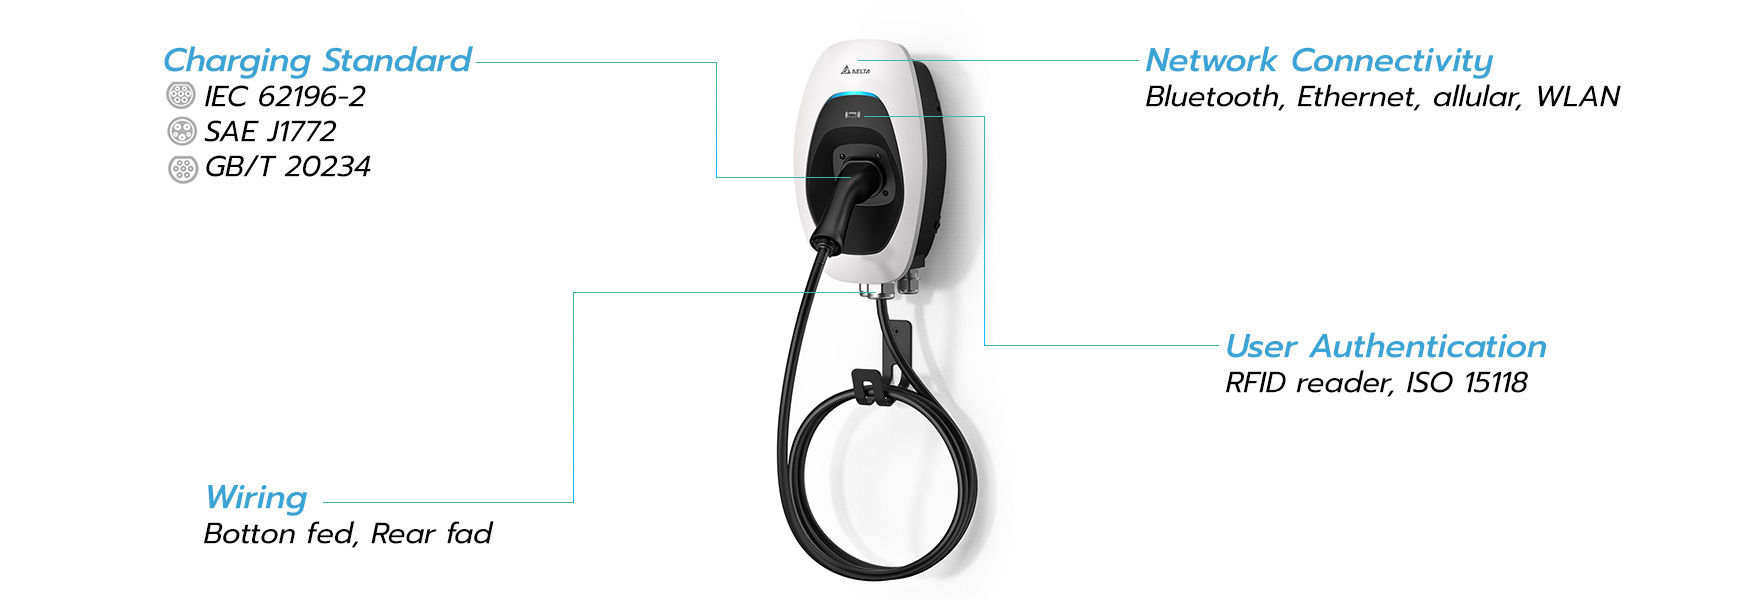 Ev Charger - Delta Ac Max 22 kW